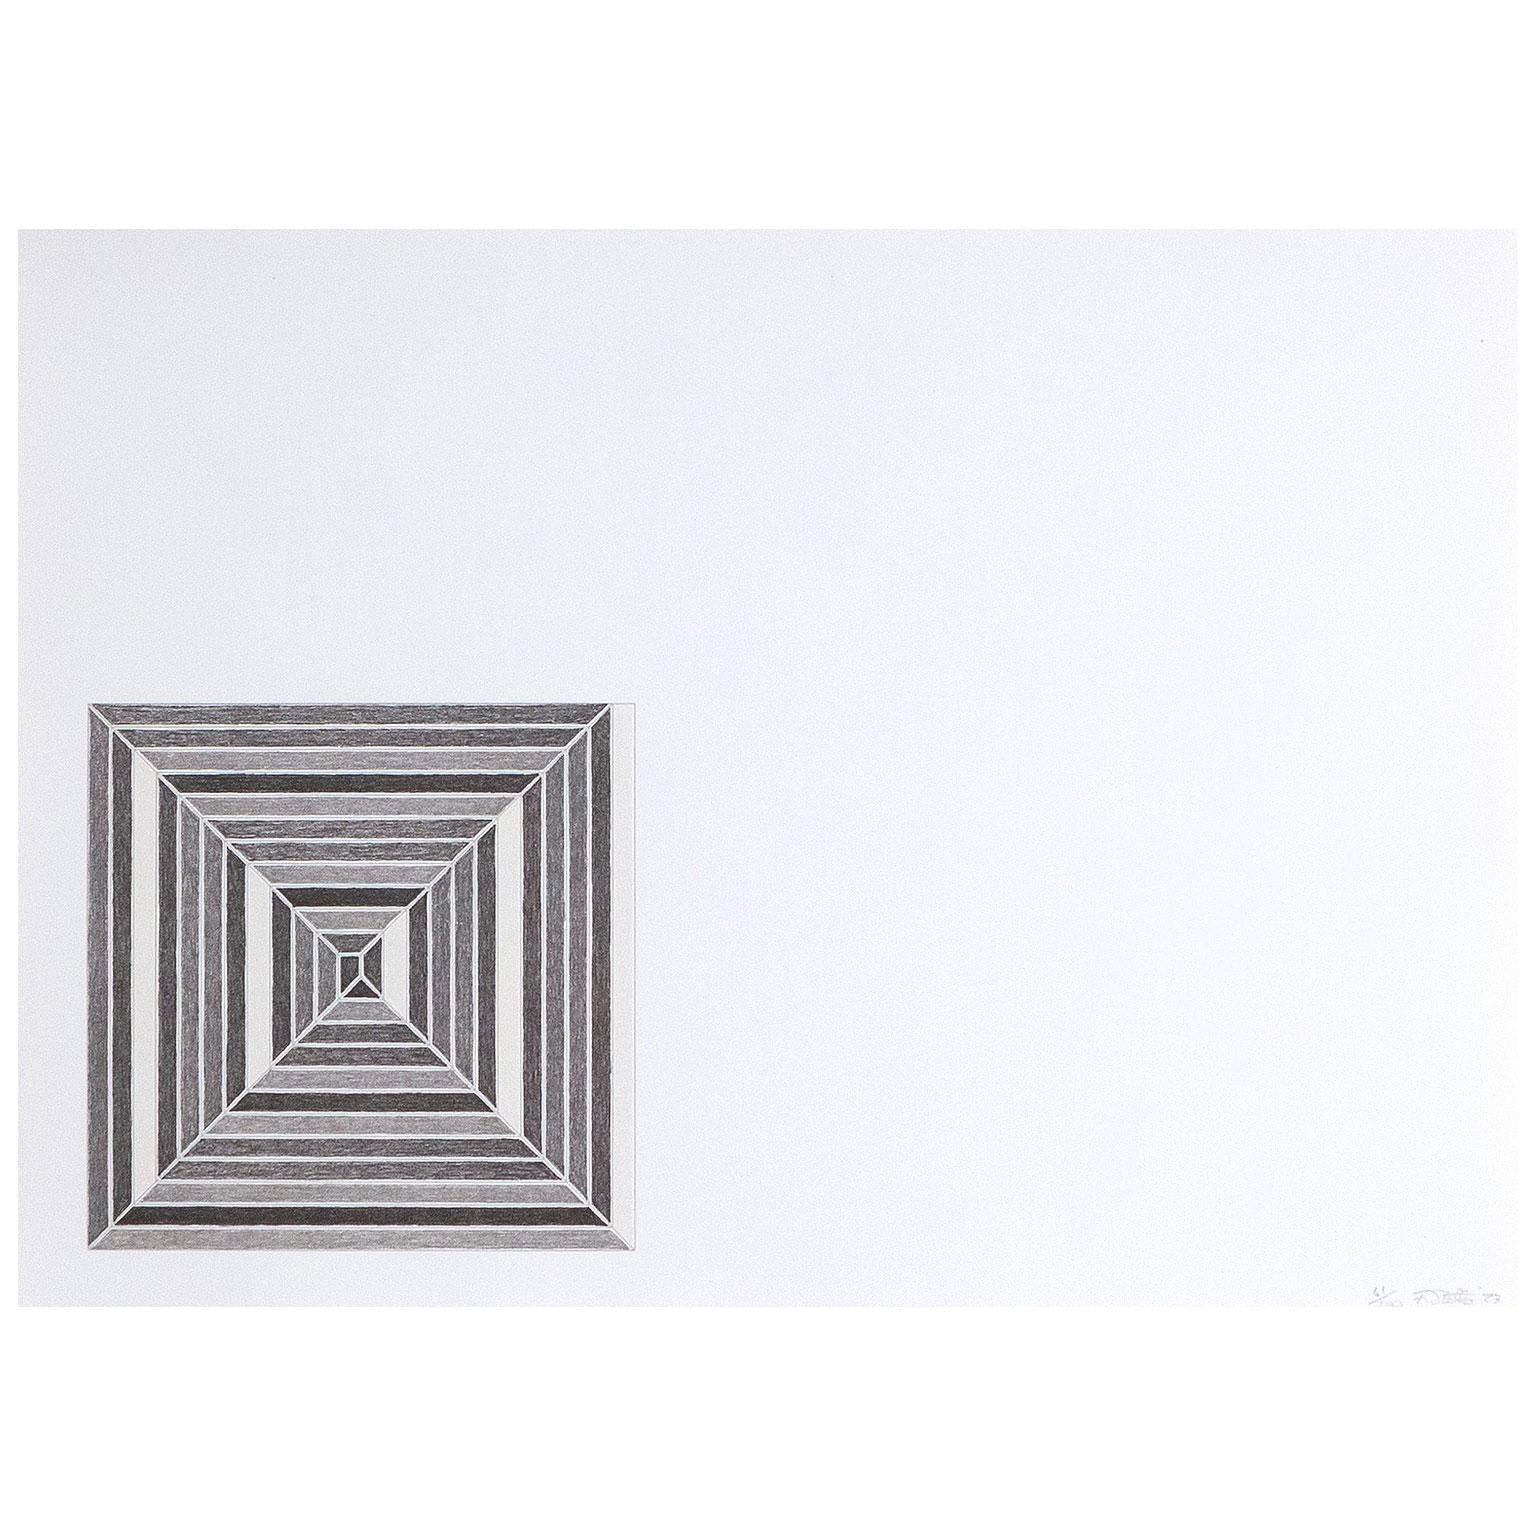 Les Indes Galantes I - Abstract Print by Frank Stella